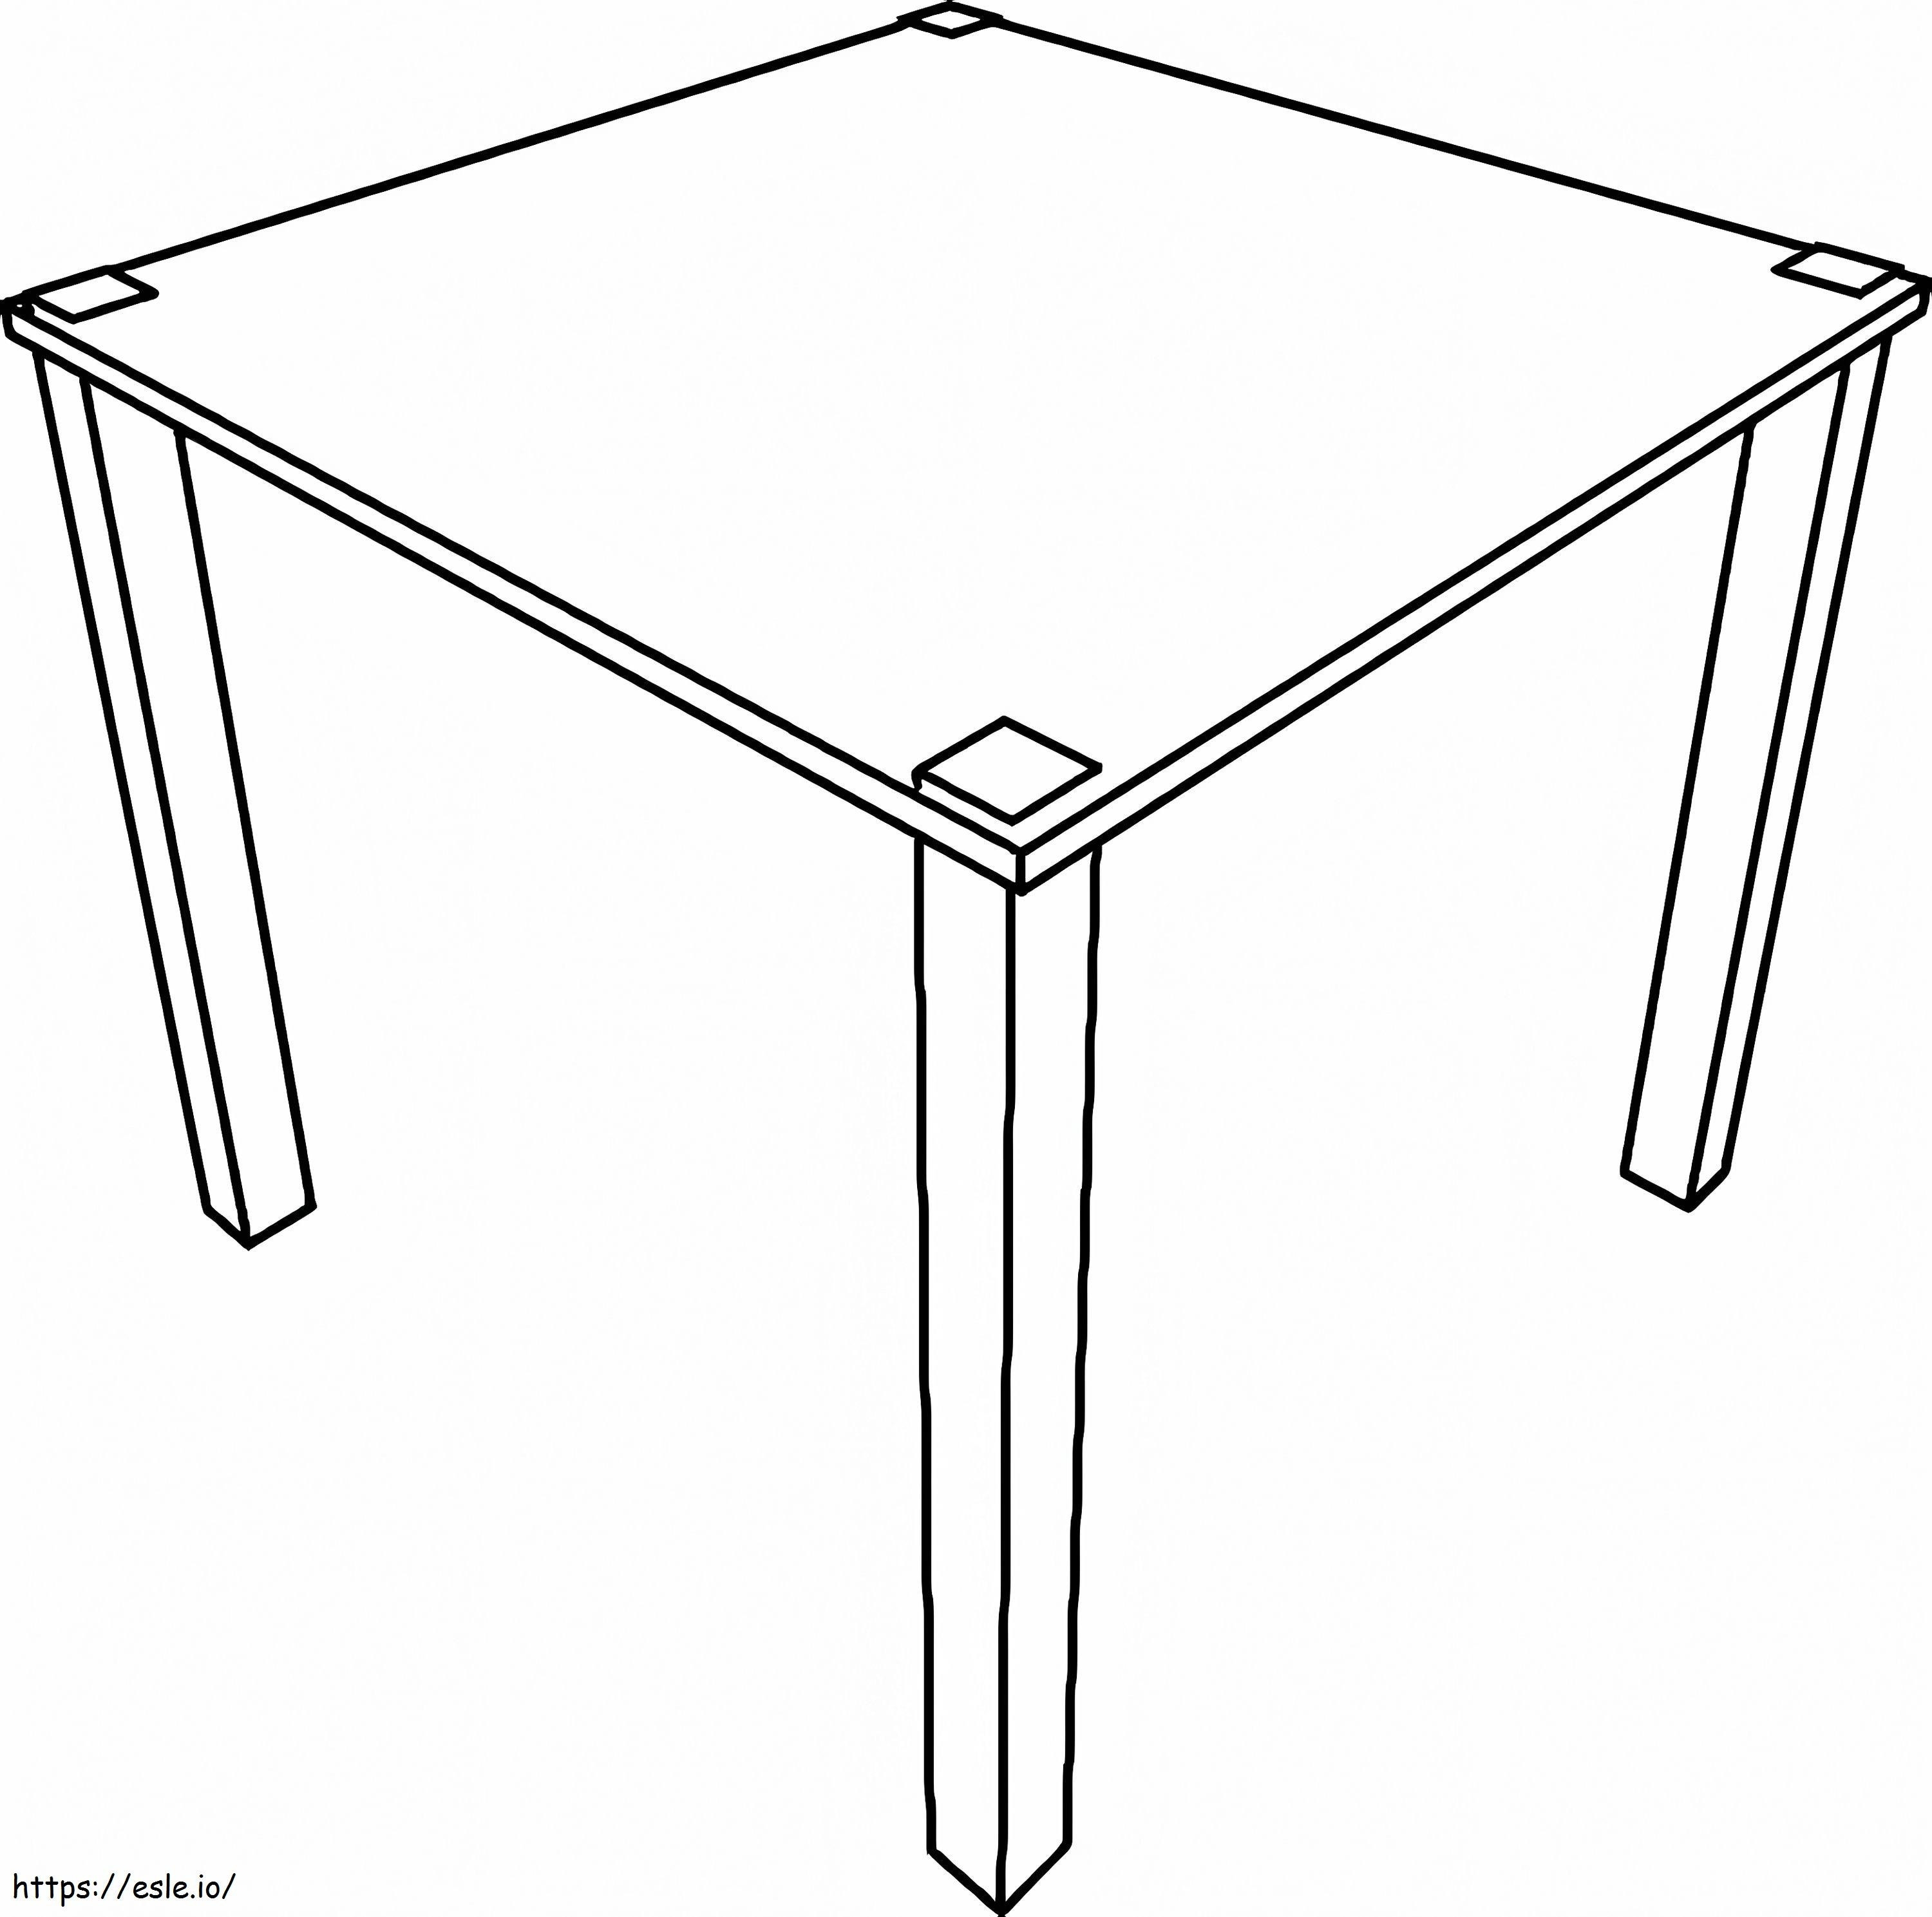 Simple Table coloring page